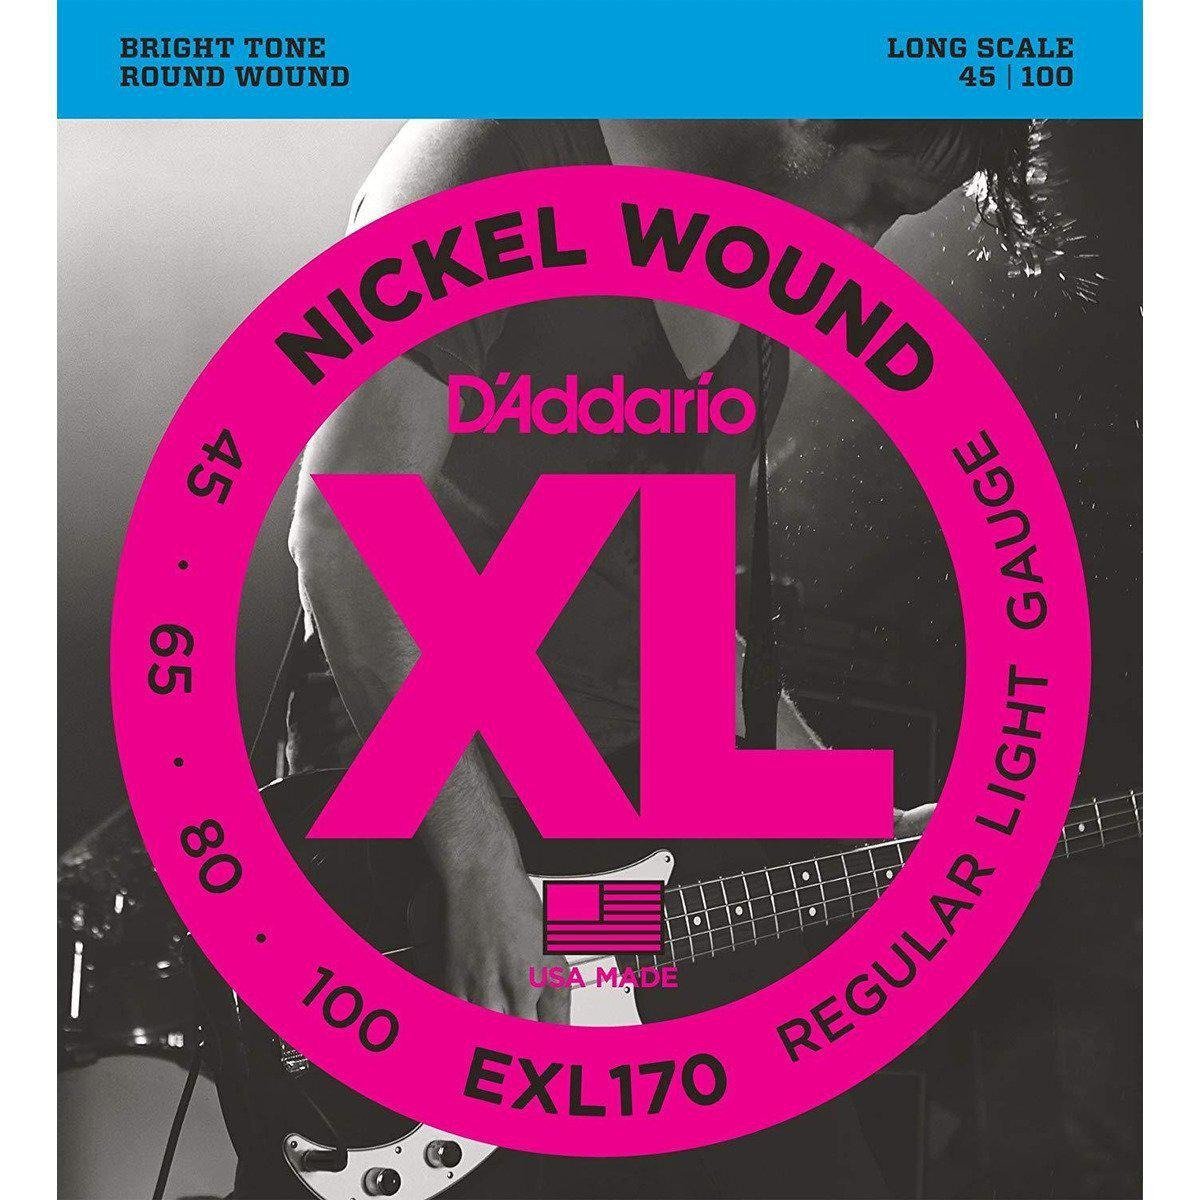 D'Addario EXL170 Nickel Wound 4-String Bass, Light, 45-100, Long Scale-Andy's Music